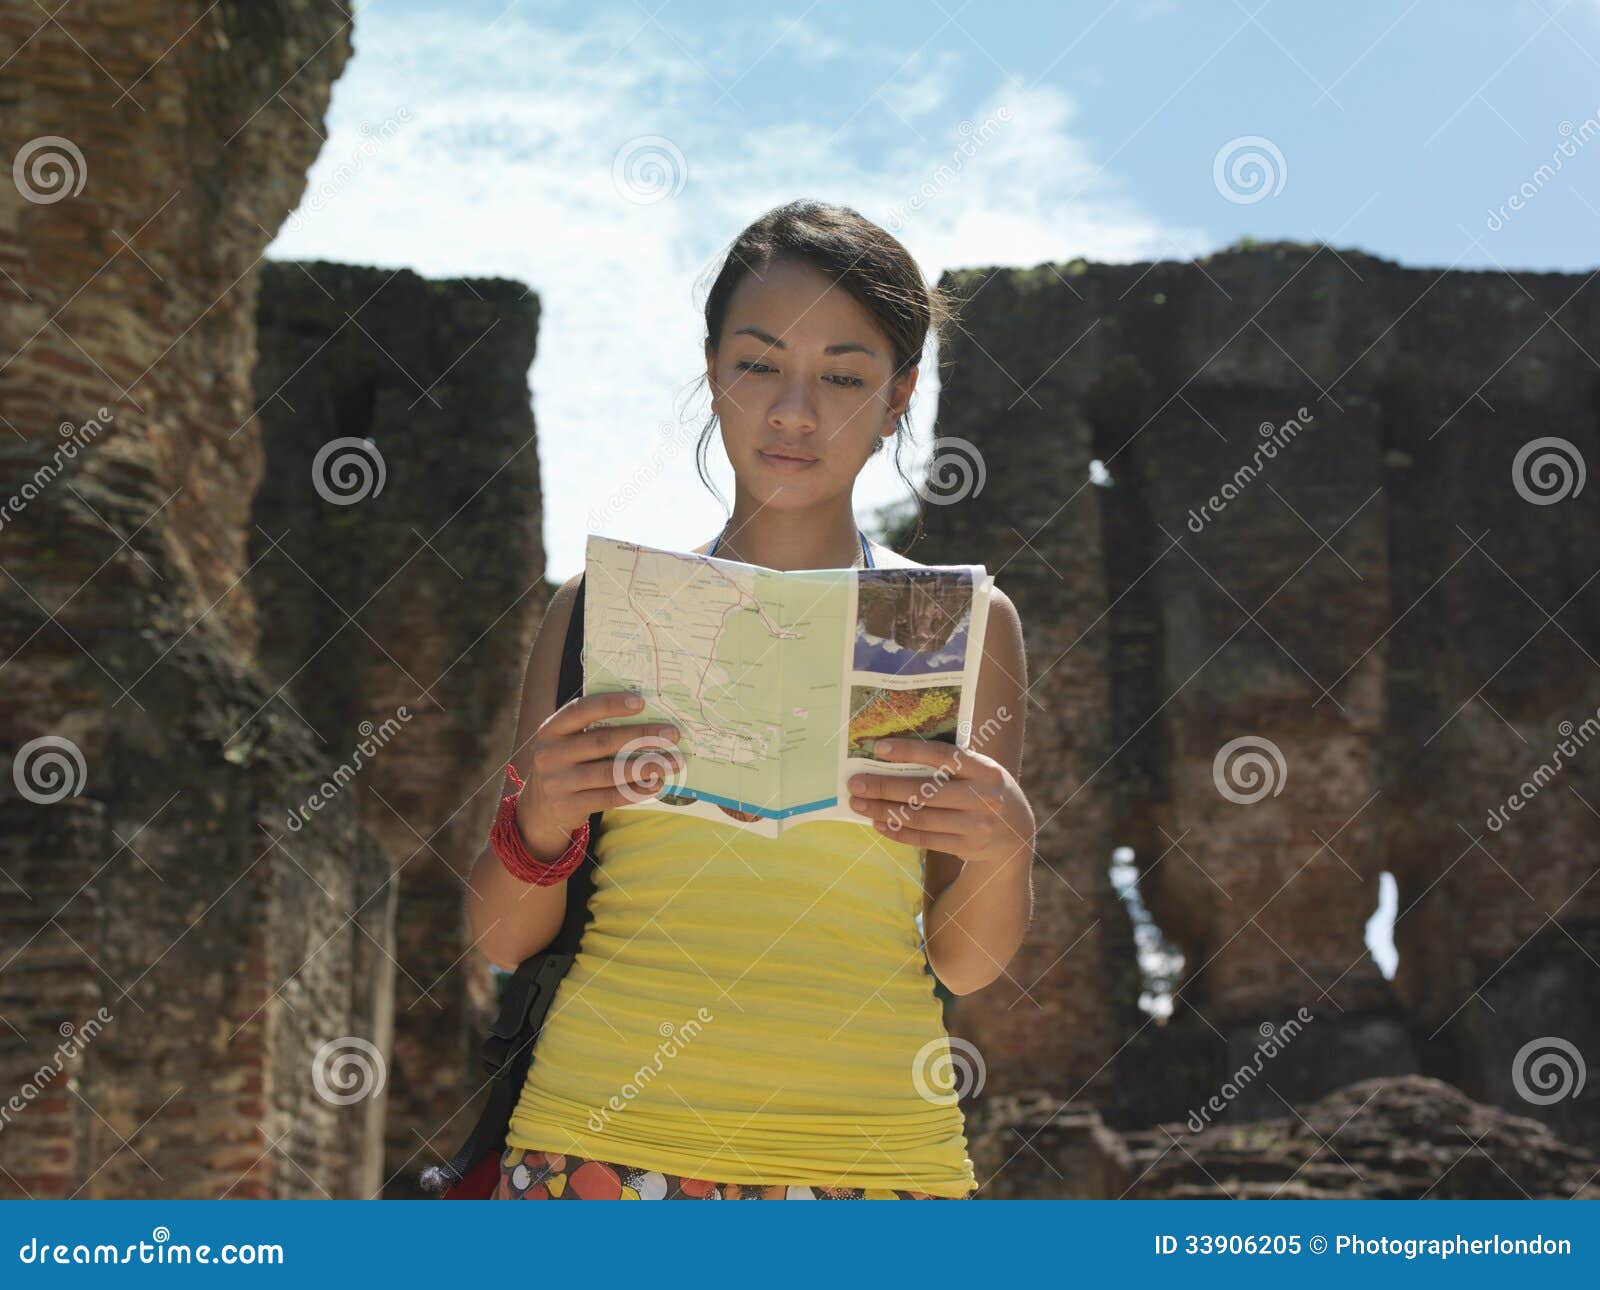 woman reading guidebook with ancient ruins in background